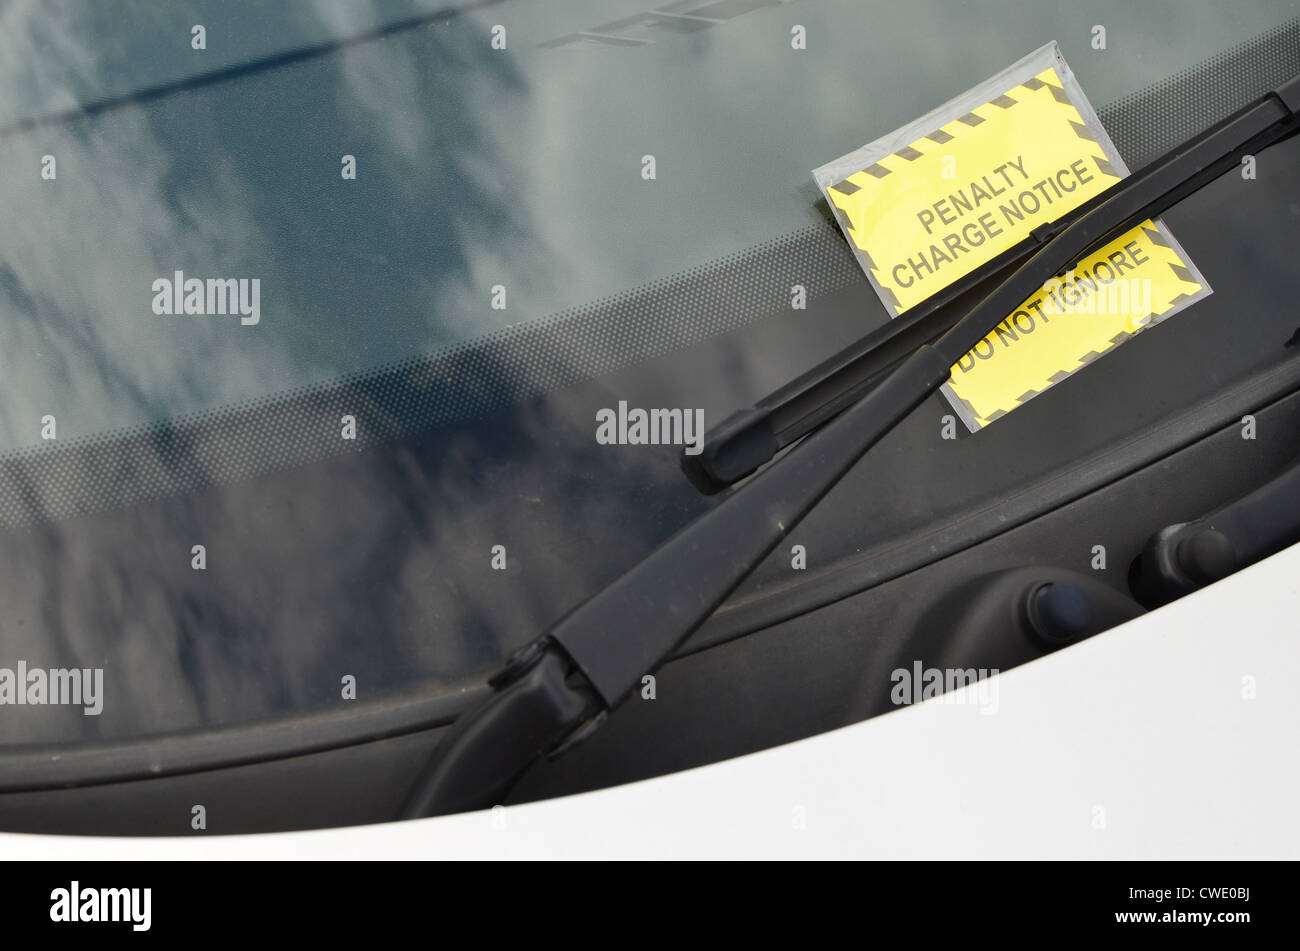 Penalty Charge Notice under the windscreen wiper of a silver car. Stock Photo